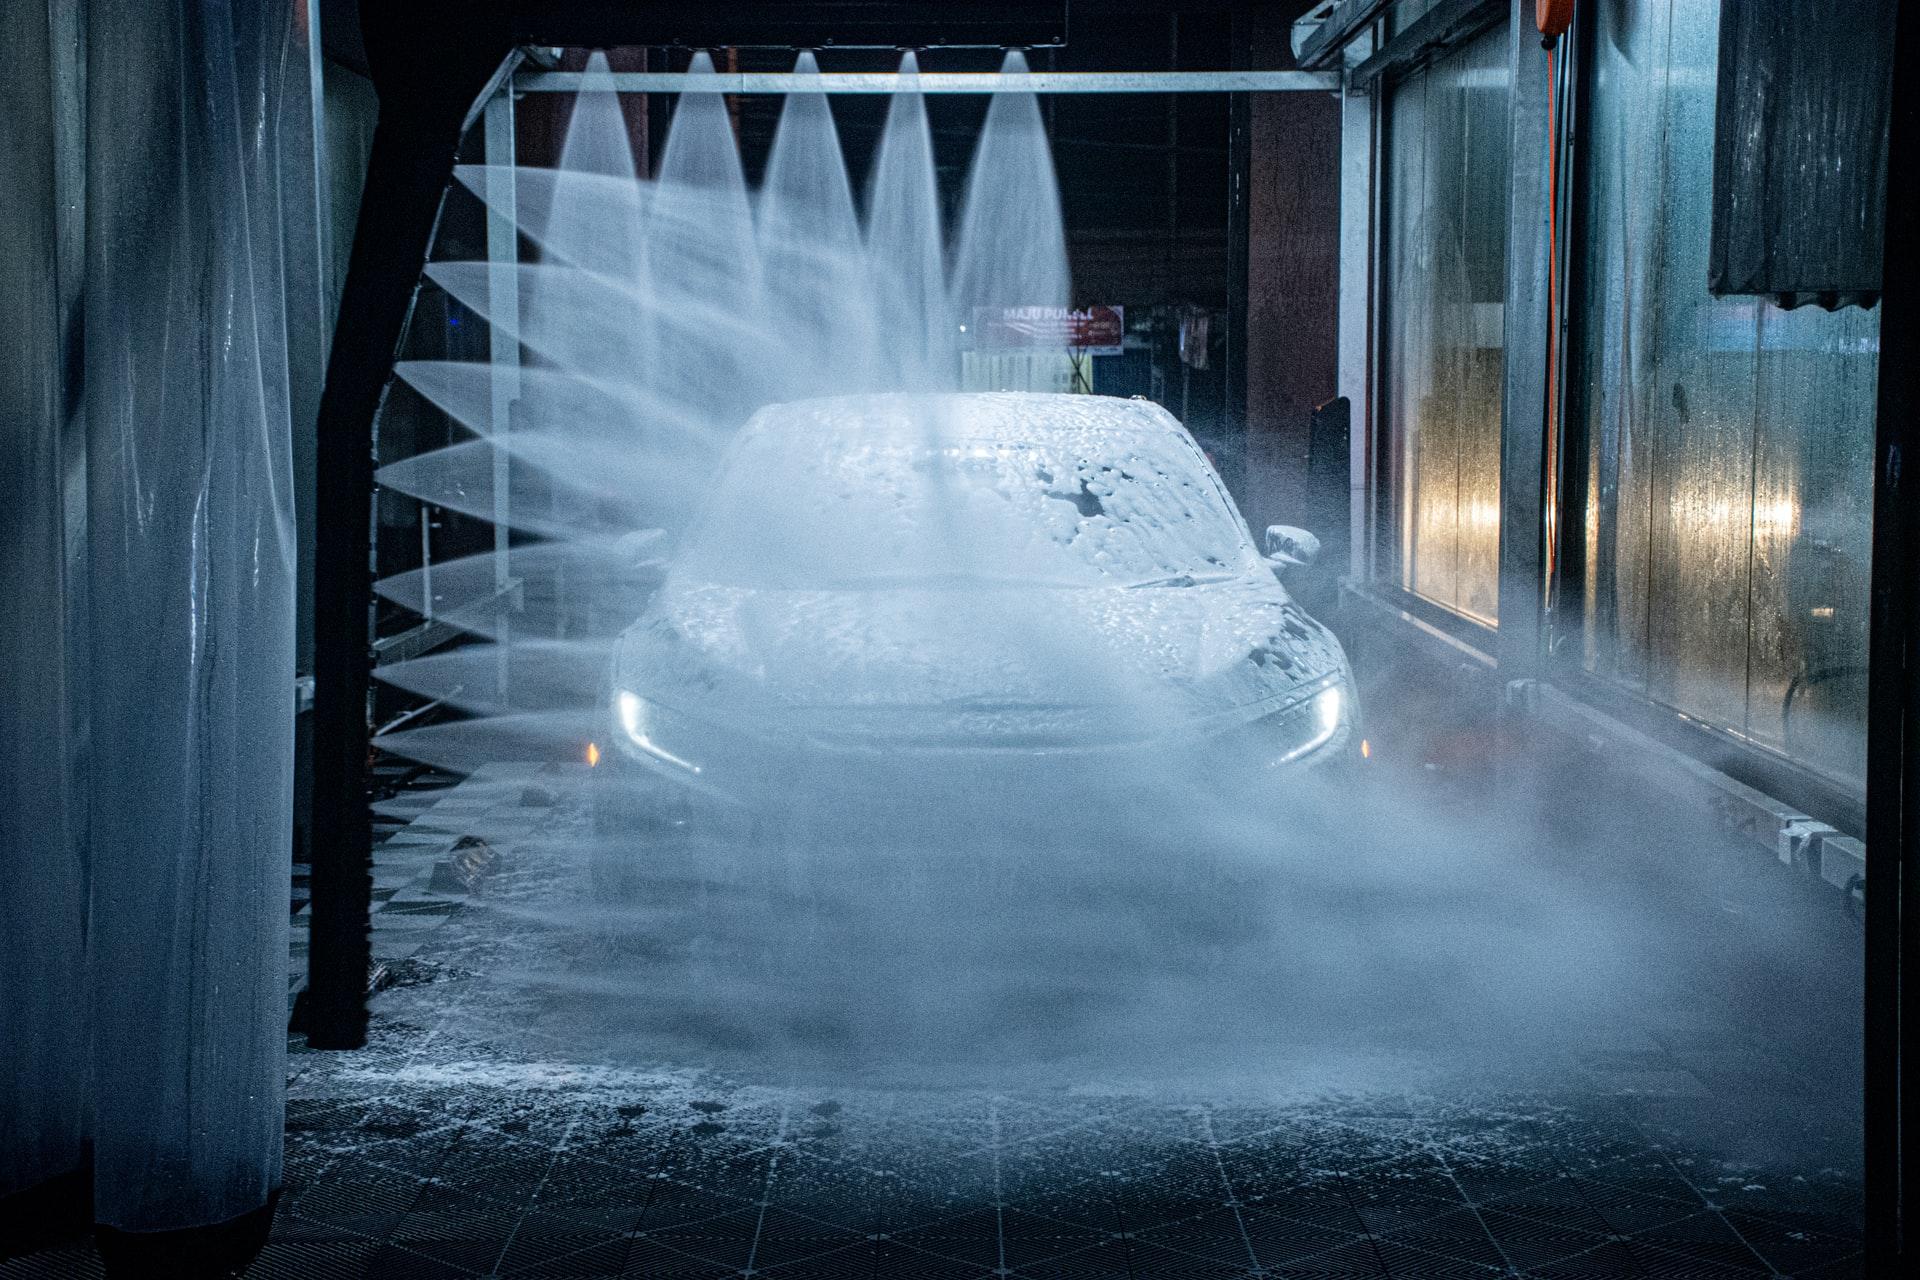 Older car washes can damage newer electric cars.